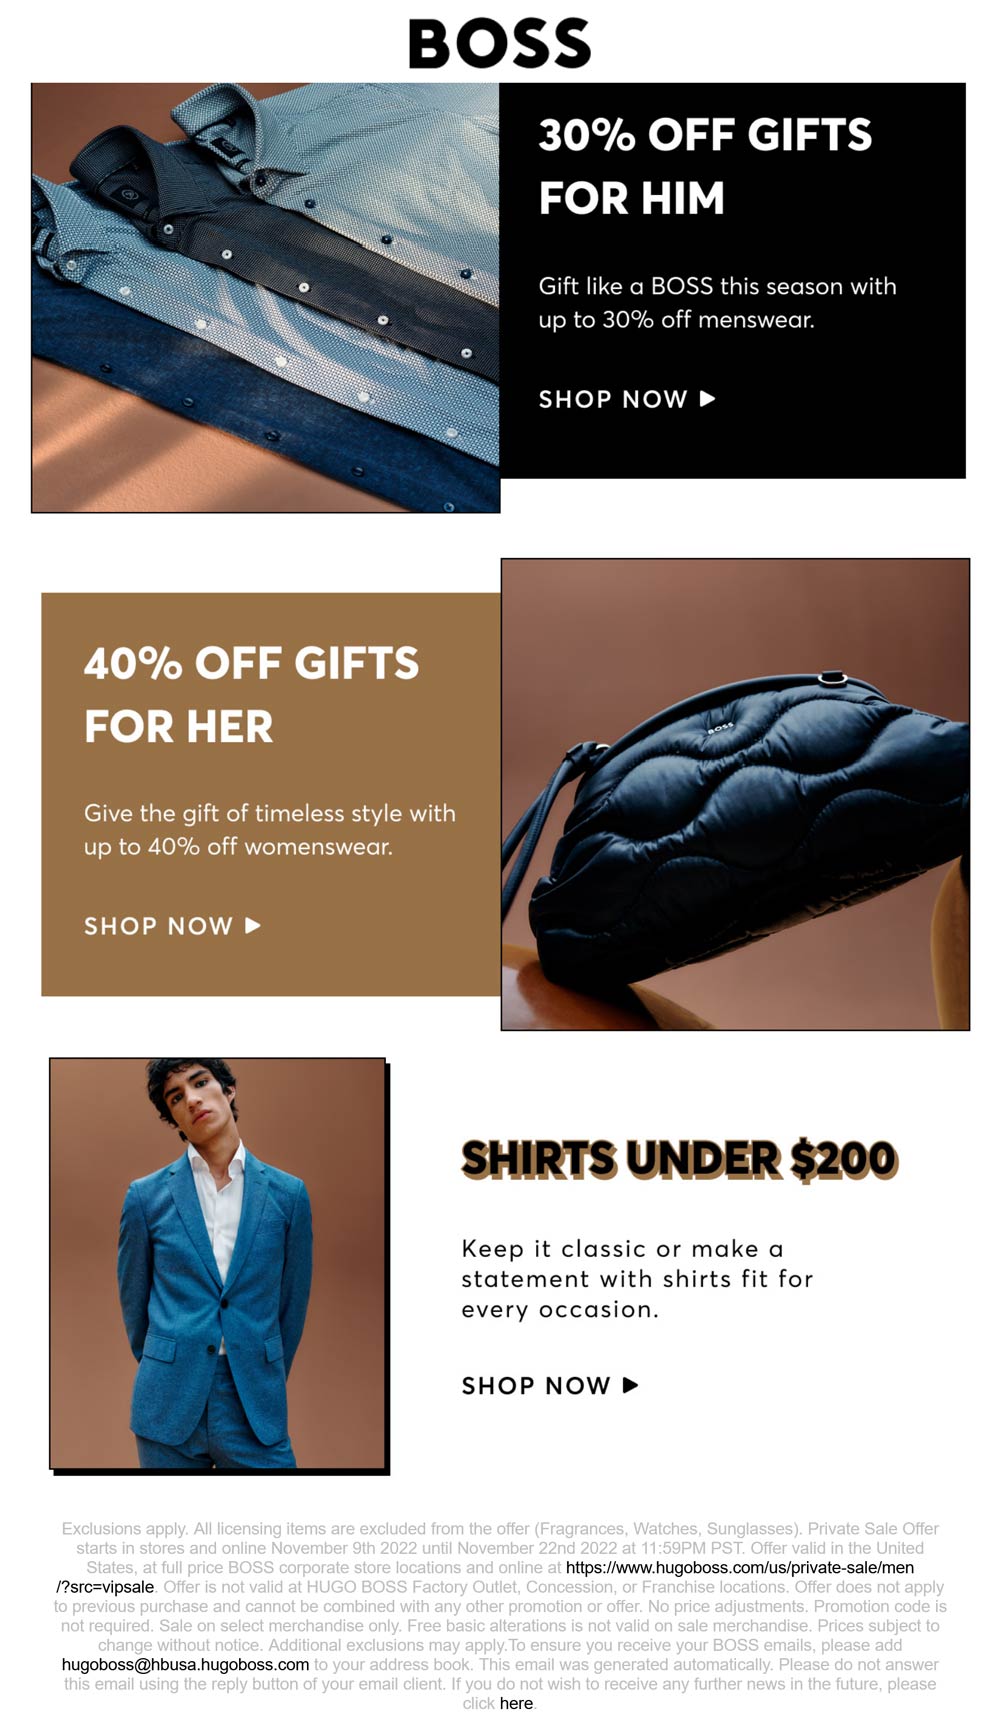 BOSS stores Coupon  30% off menswear & 40% off womenswear at BOSS, ditto online #boss 